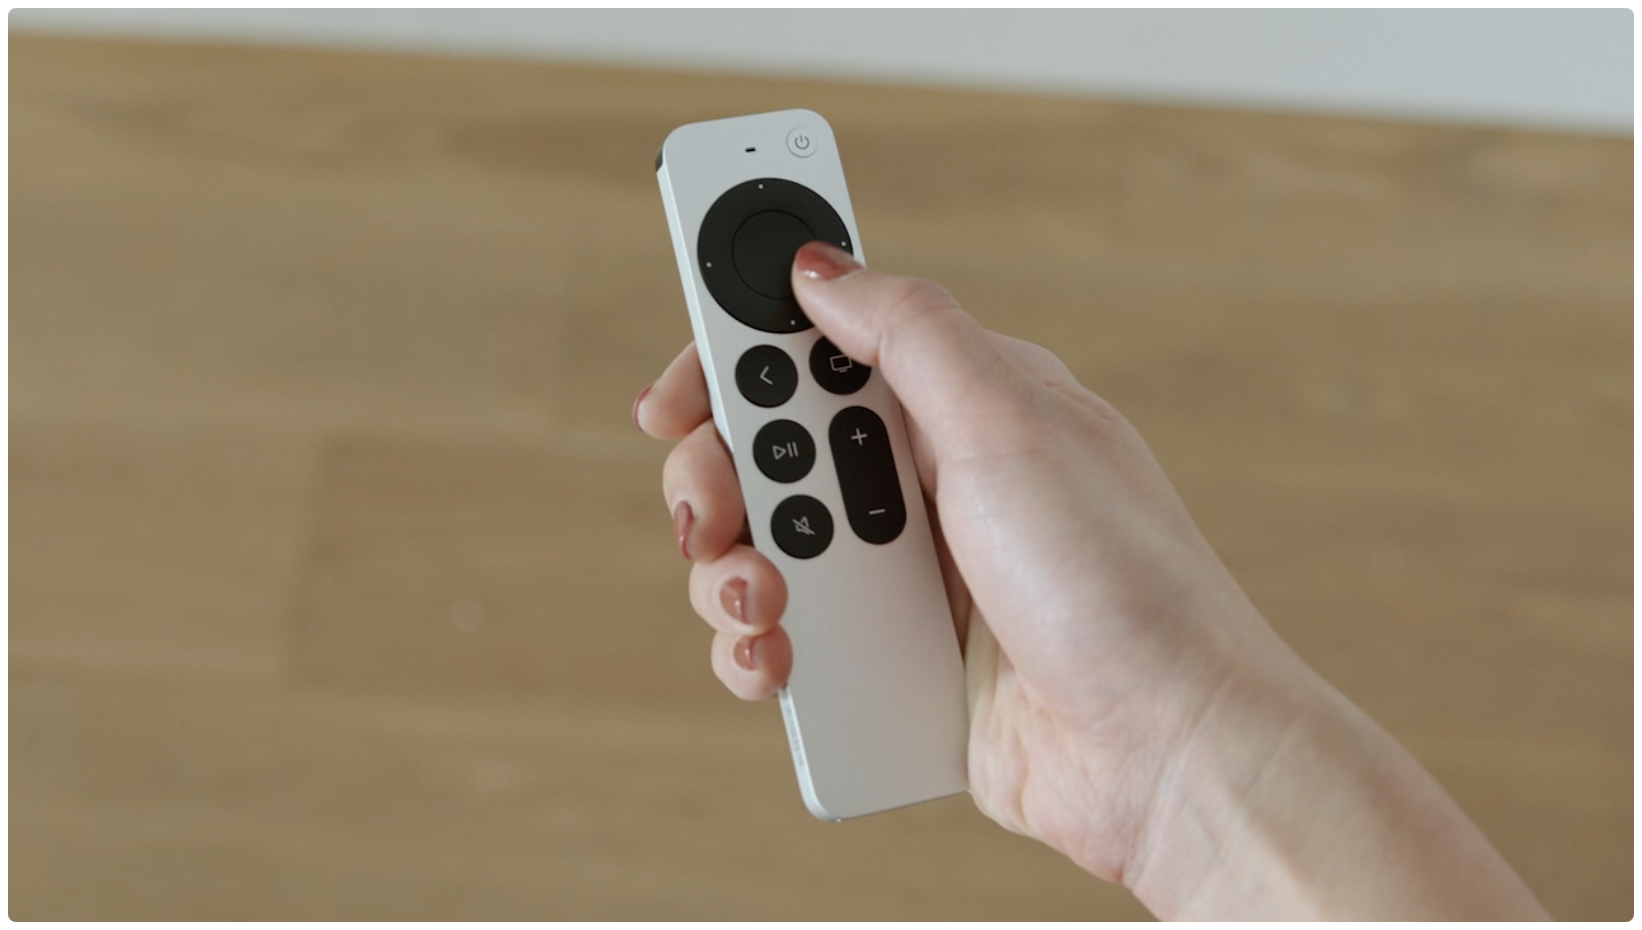 Apple's promotional image depicting a female hand holding the redesigned Siri Remote that ships with the second-generation Apple TV 4K